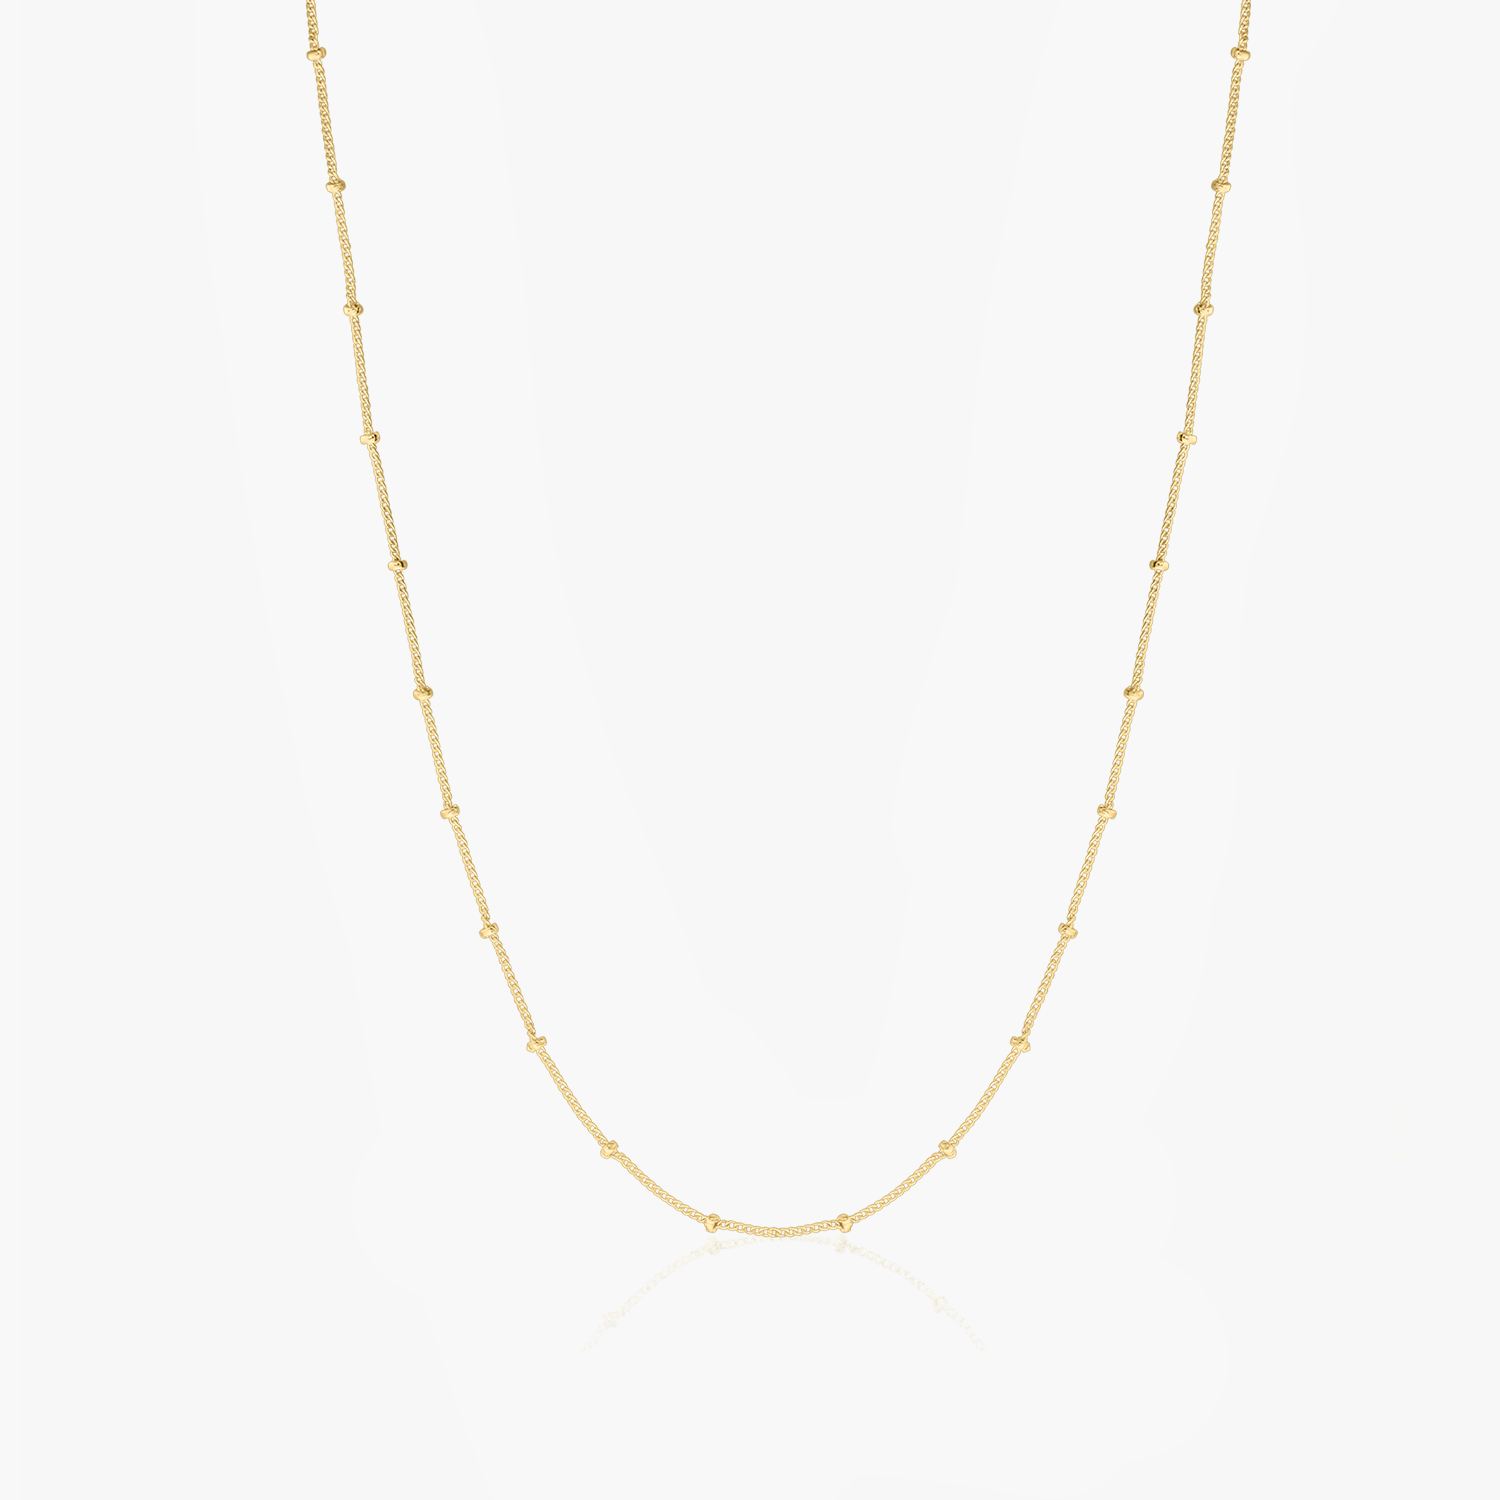 Golden Beaded Silver Chain